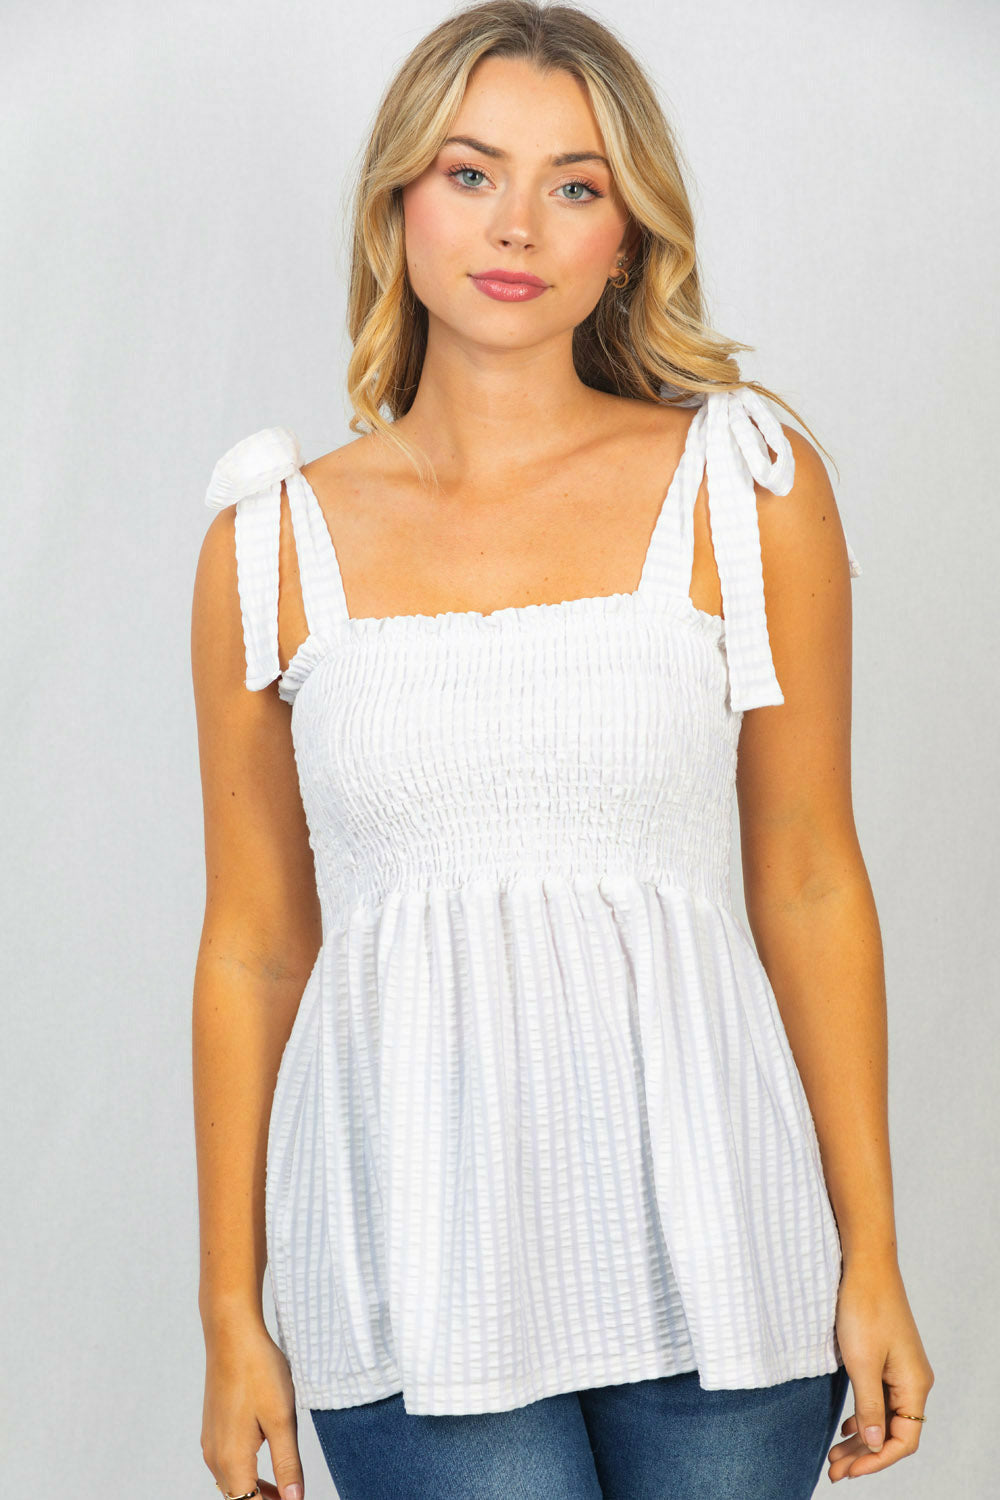 Clouds of White Smocked Top